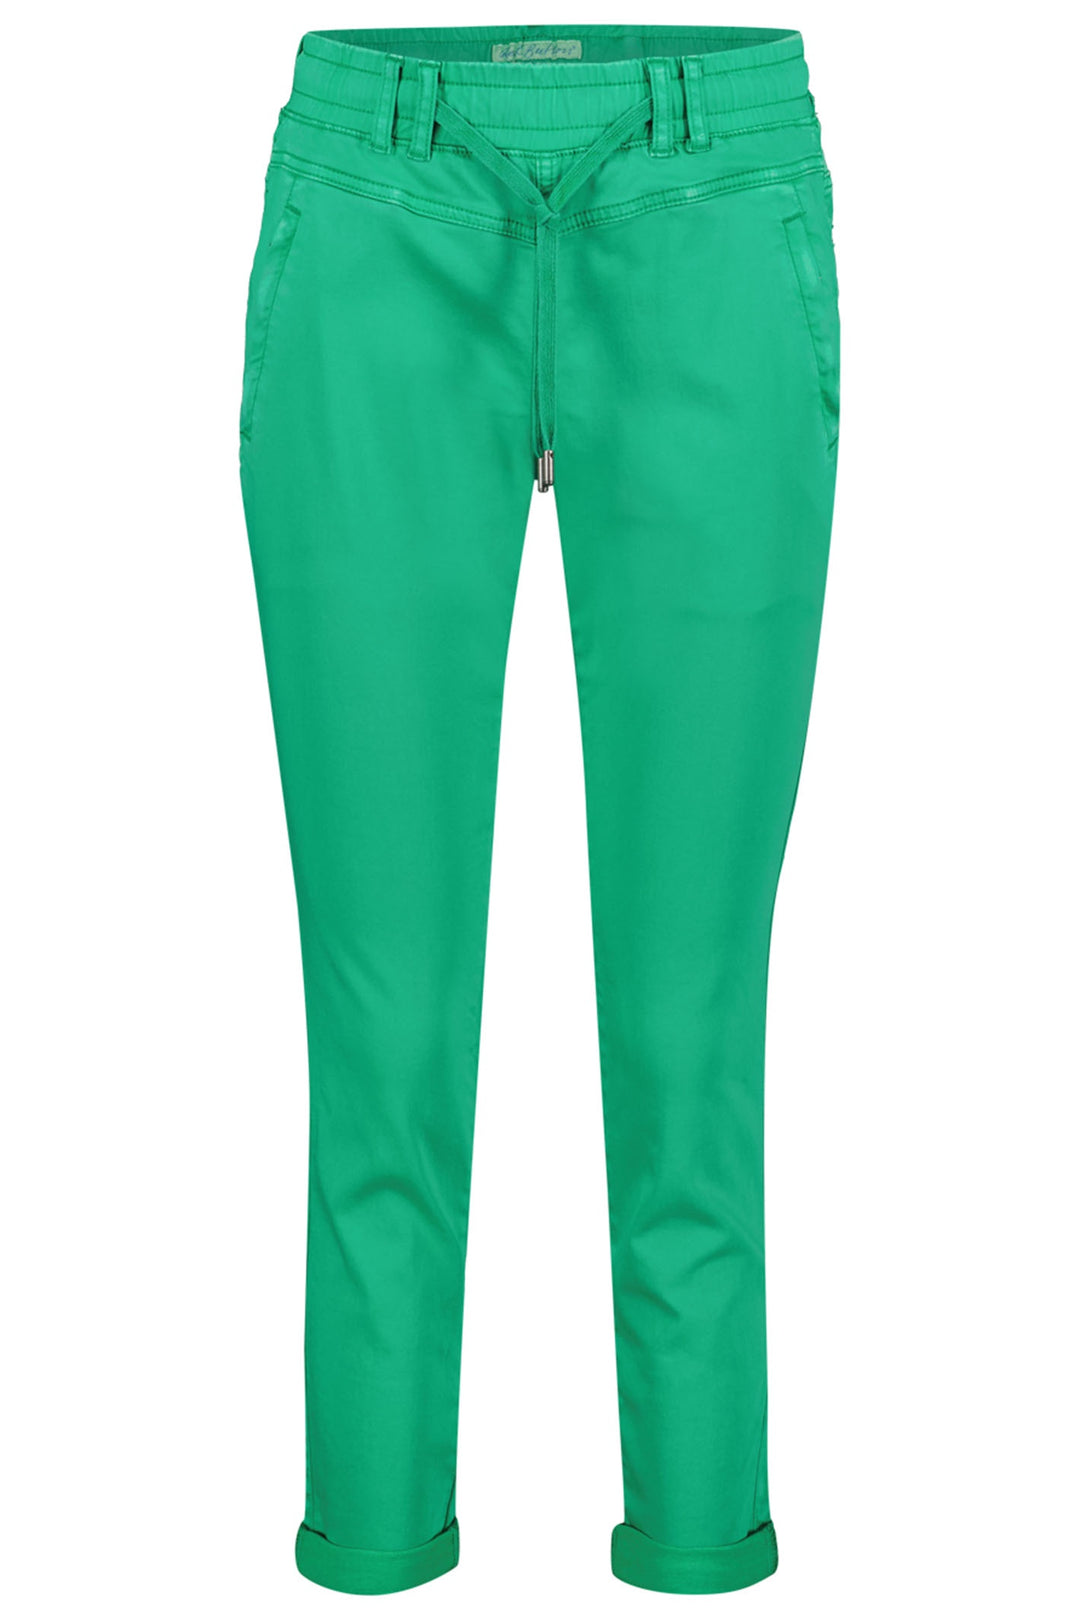 Red Button SRB4154 Tessy Fern Green Cropped Jogger Trousers - Dotique